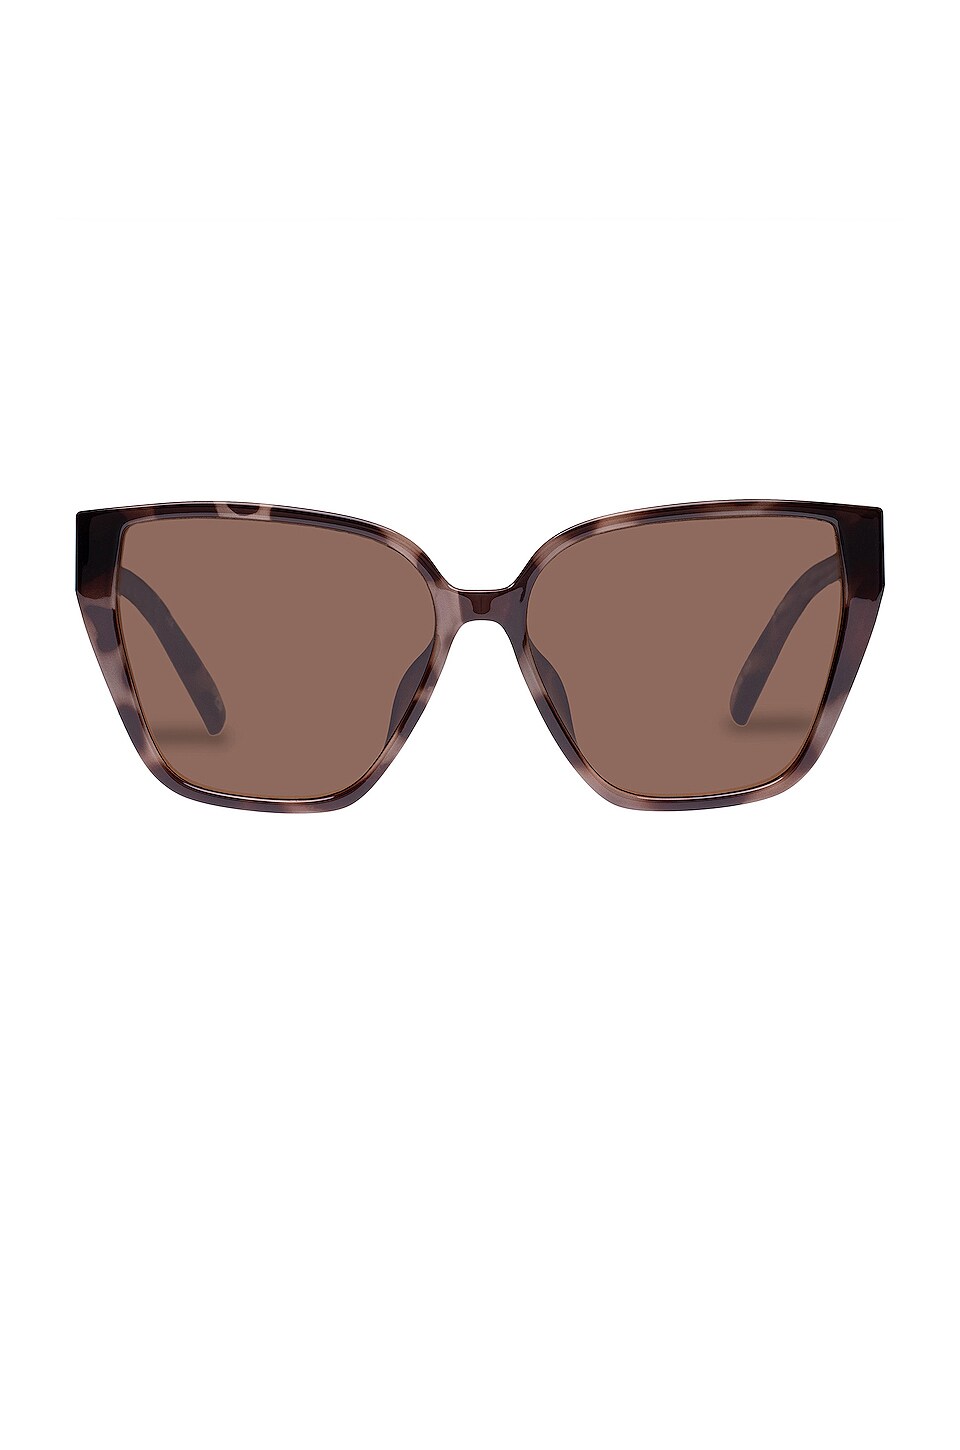 Le Specs Fash Hun Alt Fit In Volcanic Tort And Brown Mono Revolve 6104